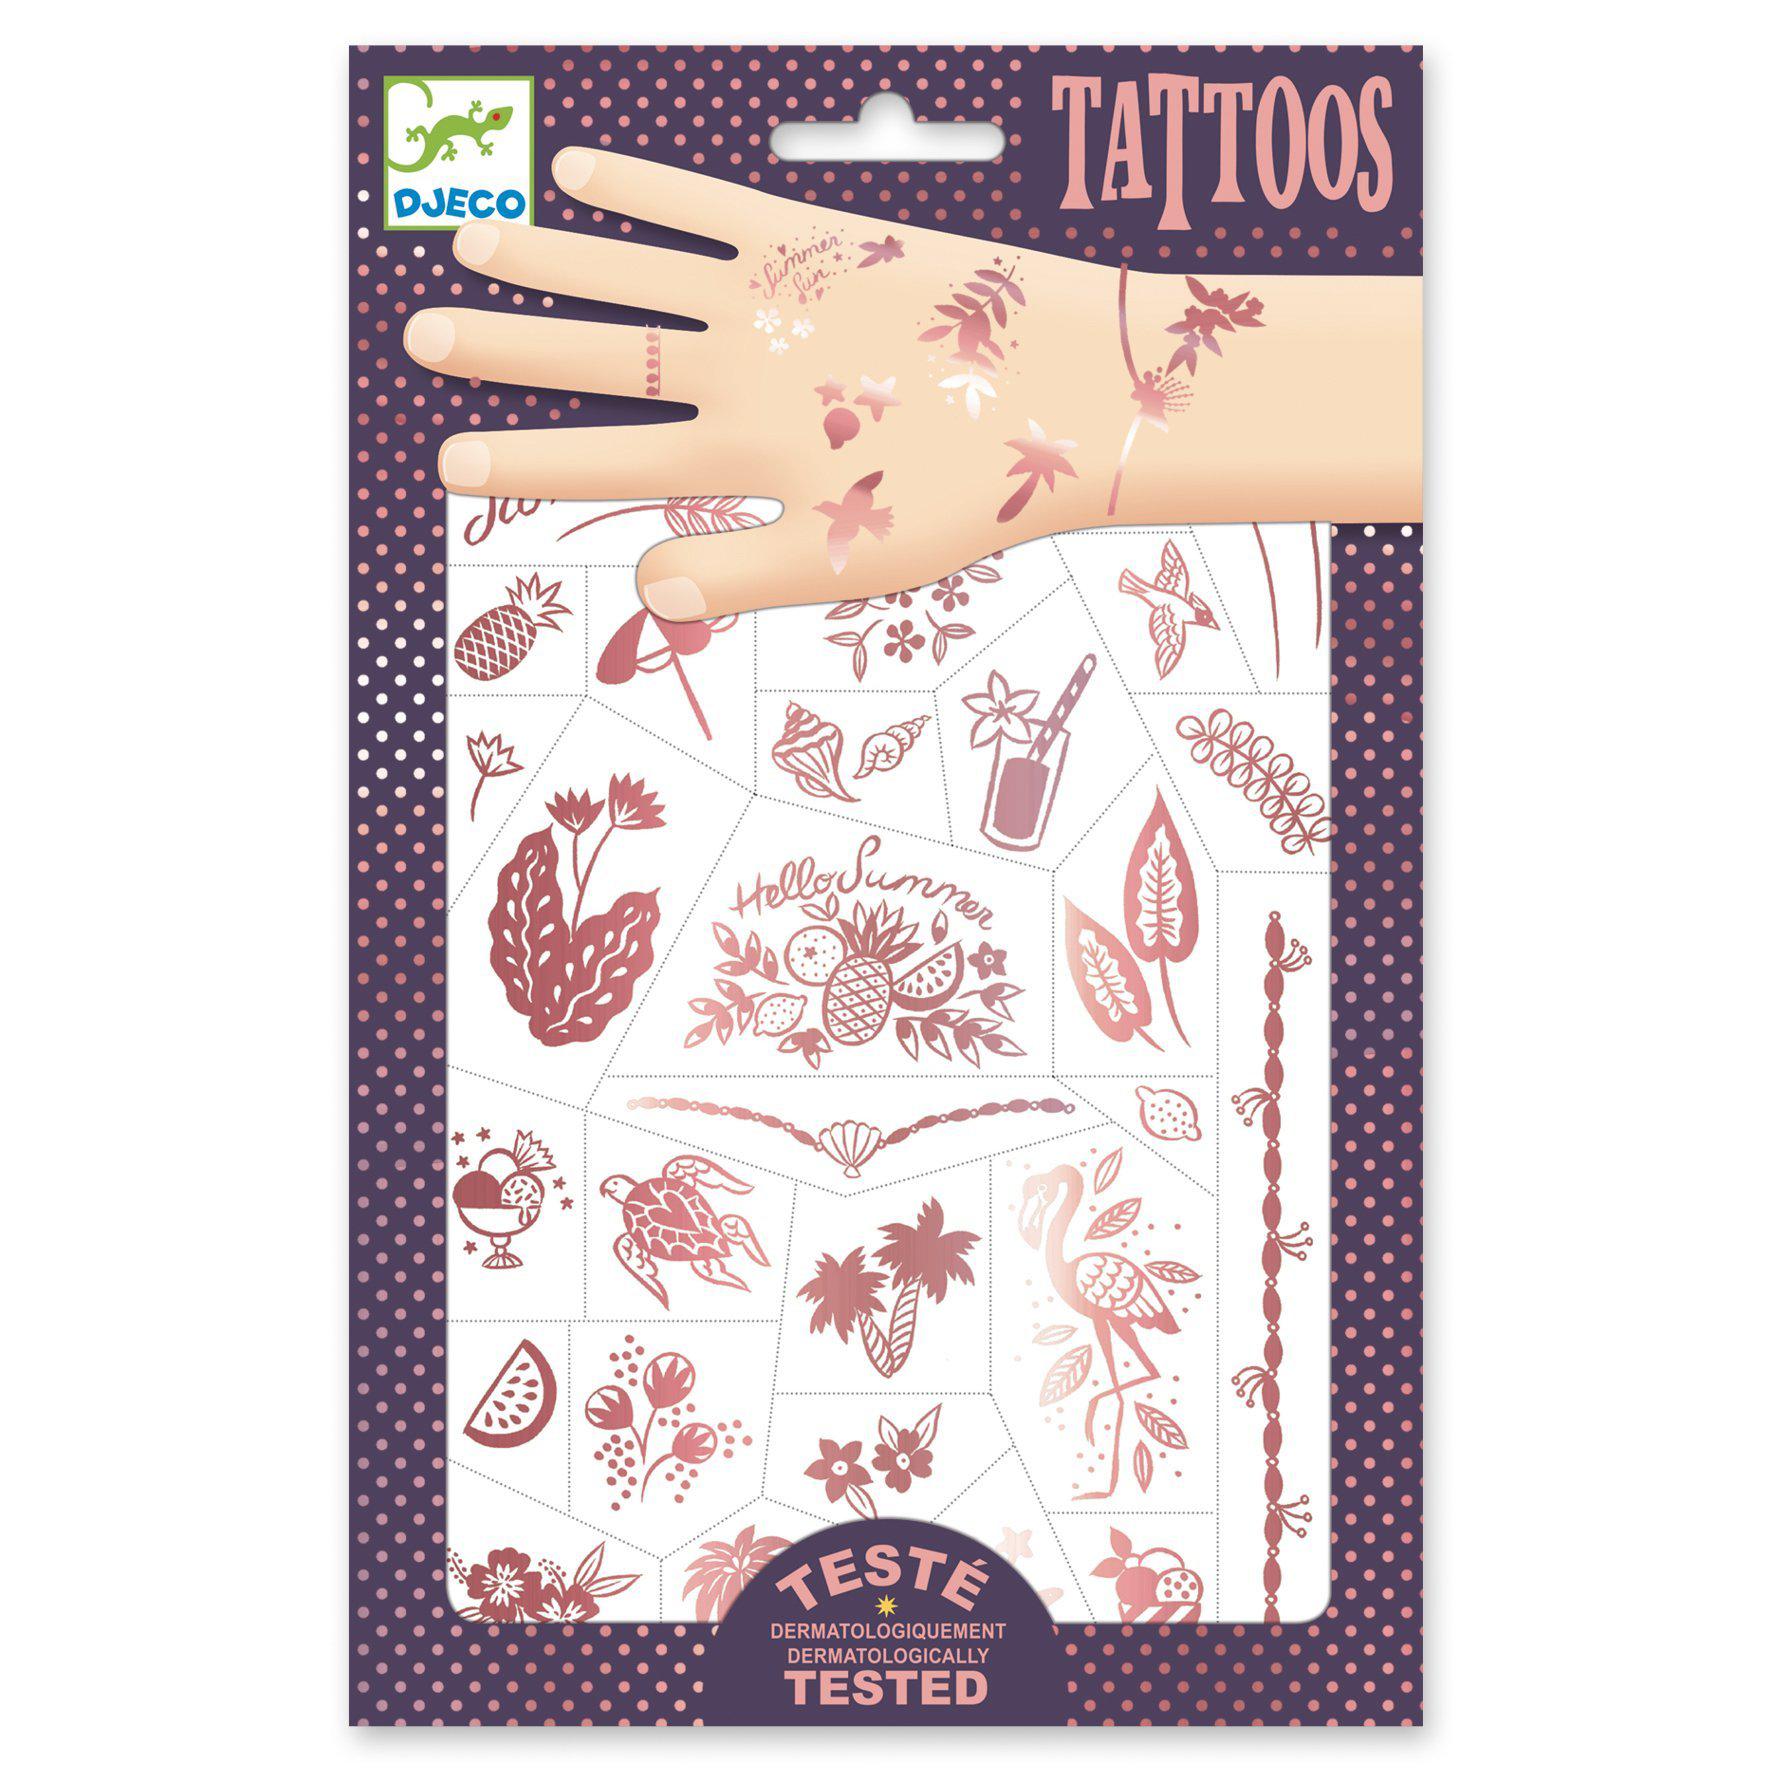 Buy Terra Tattoos Gold Silver & Black Metallic Temporary Tats 75+ Egyptian  Designs Feathers, Wings, Arrows Waterproof Nontoxic Long Lasting Perfect  for Beach, Festivals, & more! Online at Lowest Price Ever in